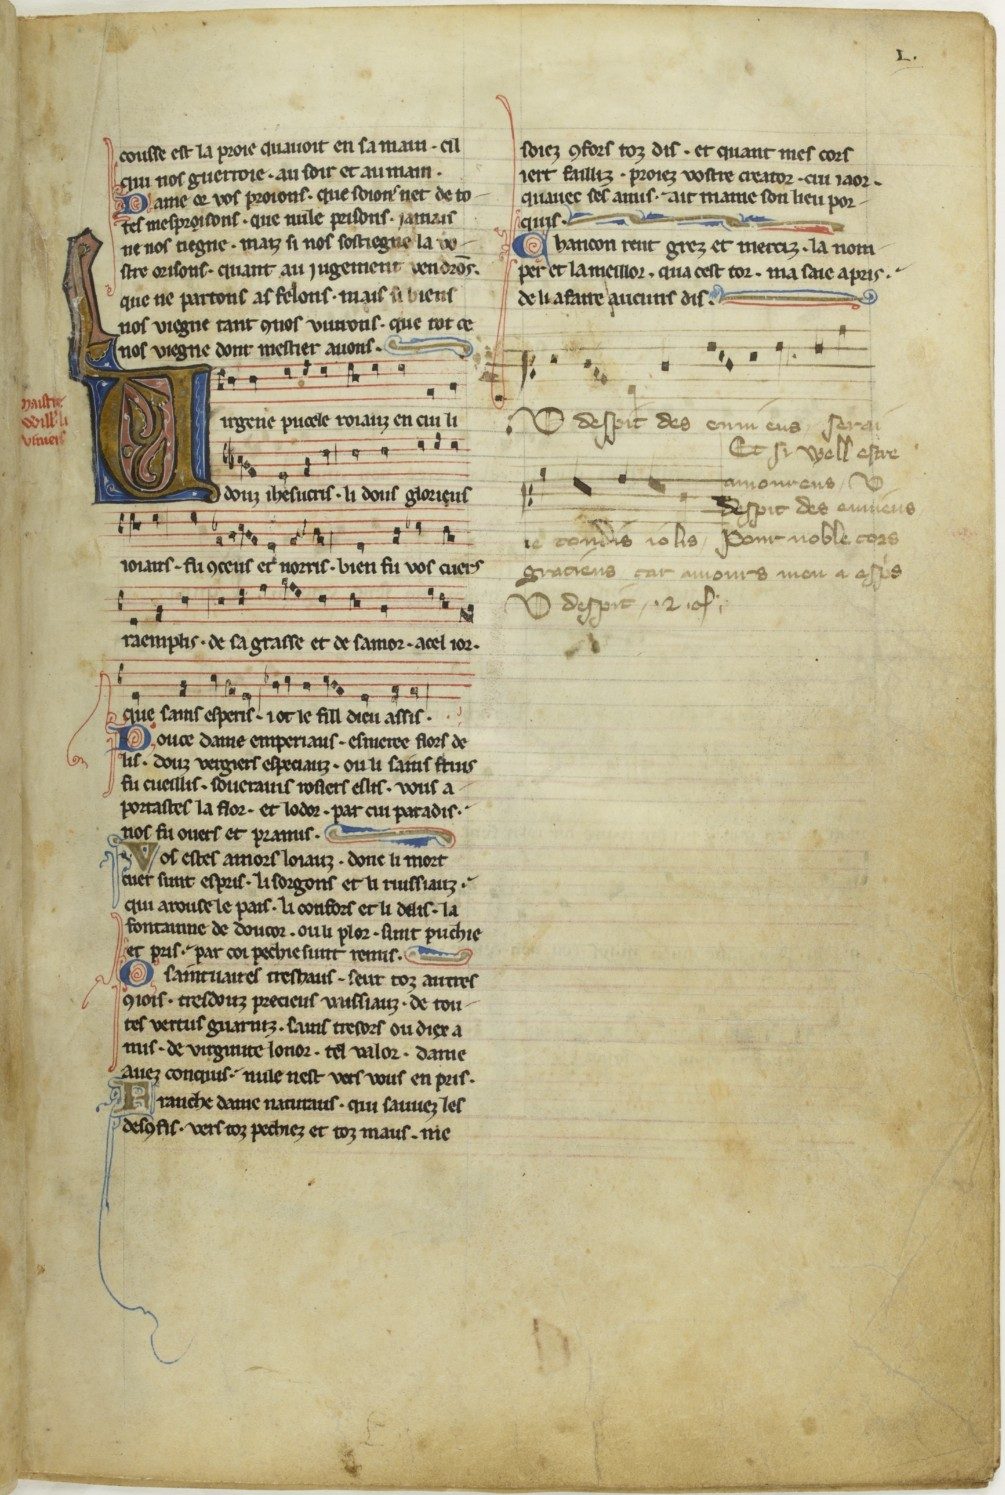 A manuscript of a thirteenth century Trouvere song